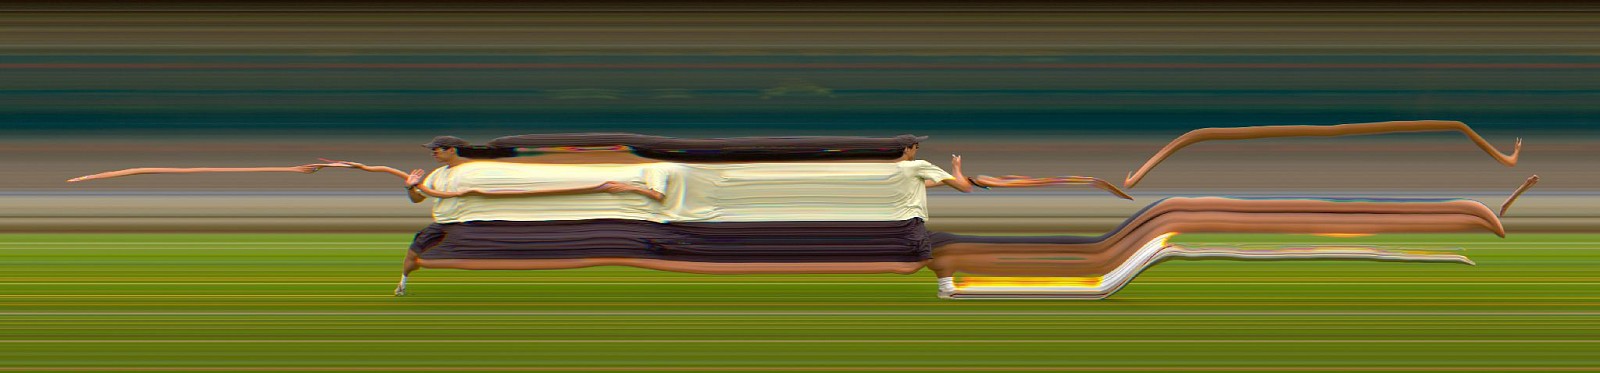 Jay Mark Johnson, TAICHI MOTION STUDY 131, 2005 Los Angeles CA
archival pigment on paper, mounted on aluminum, 40 x 171 in. (101.6 x 434.3 cm)